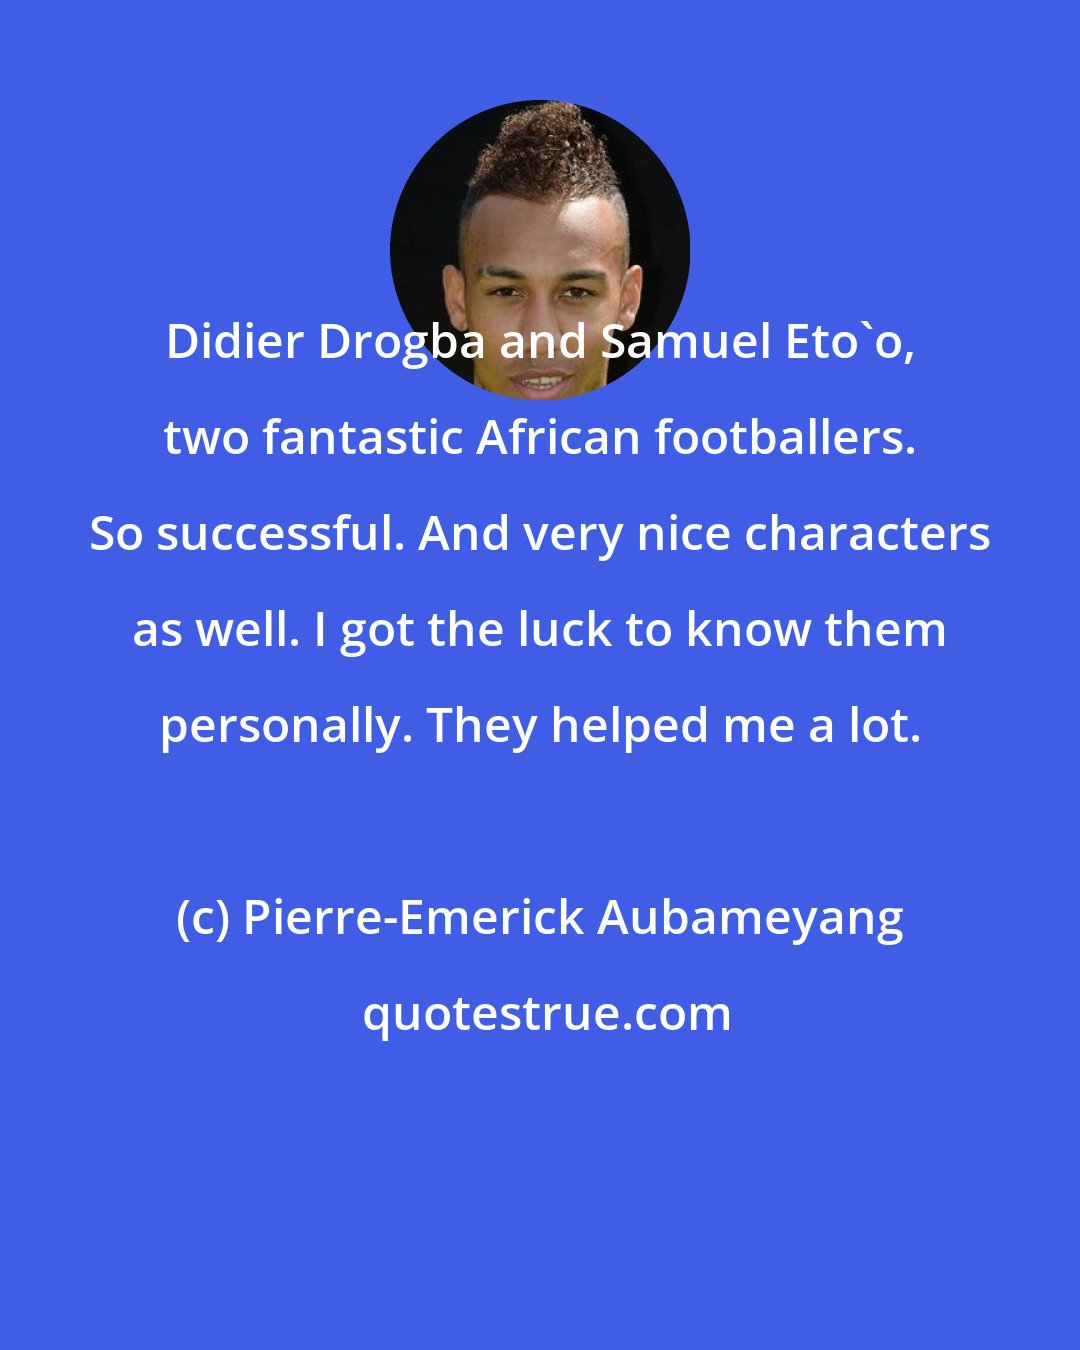 Pierre-Emerick Aubameyang: Didier Drogba and Samuel Eto'o, two fantastic African footballers. So successful. And very nice characters as well. I got the luck to know them personally. They helped me a lot.